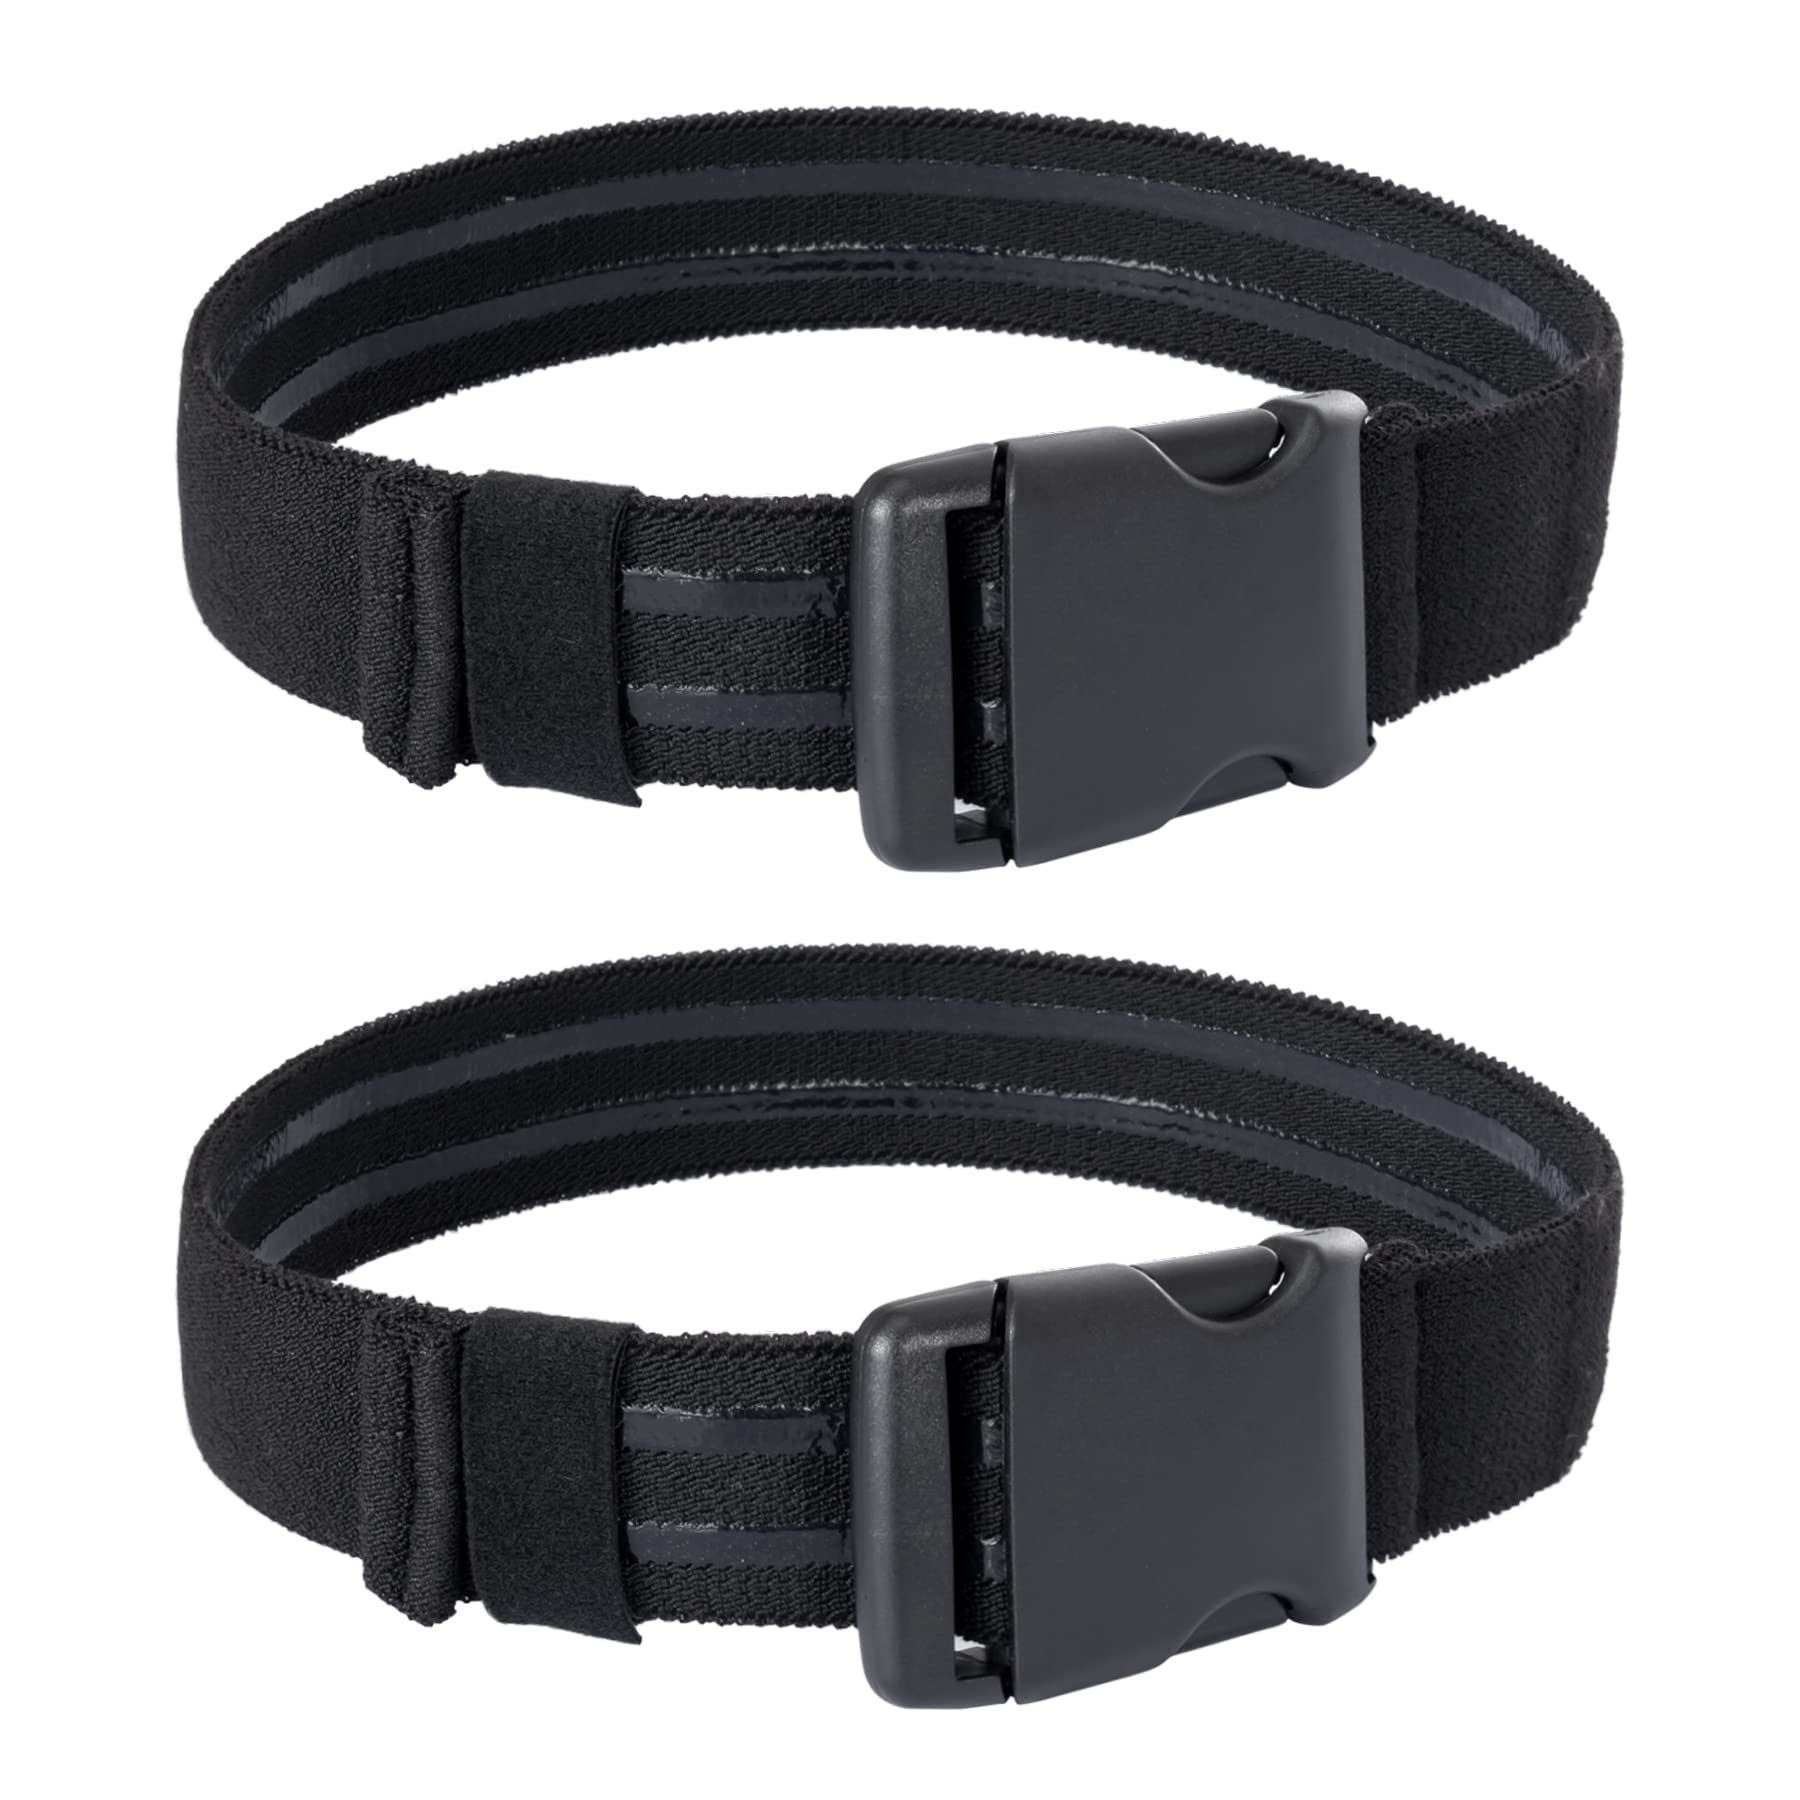 Nylon strap with buckle